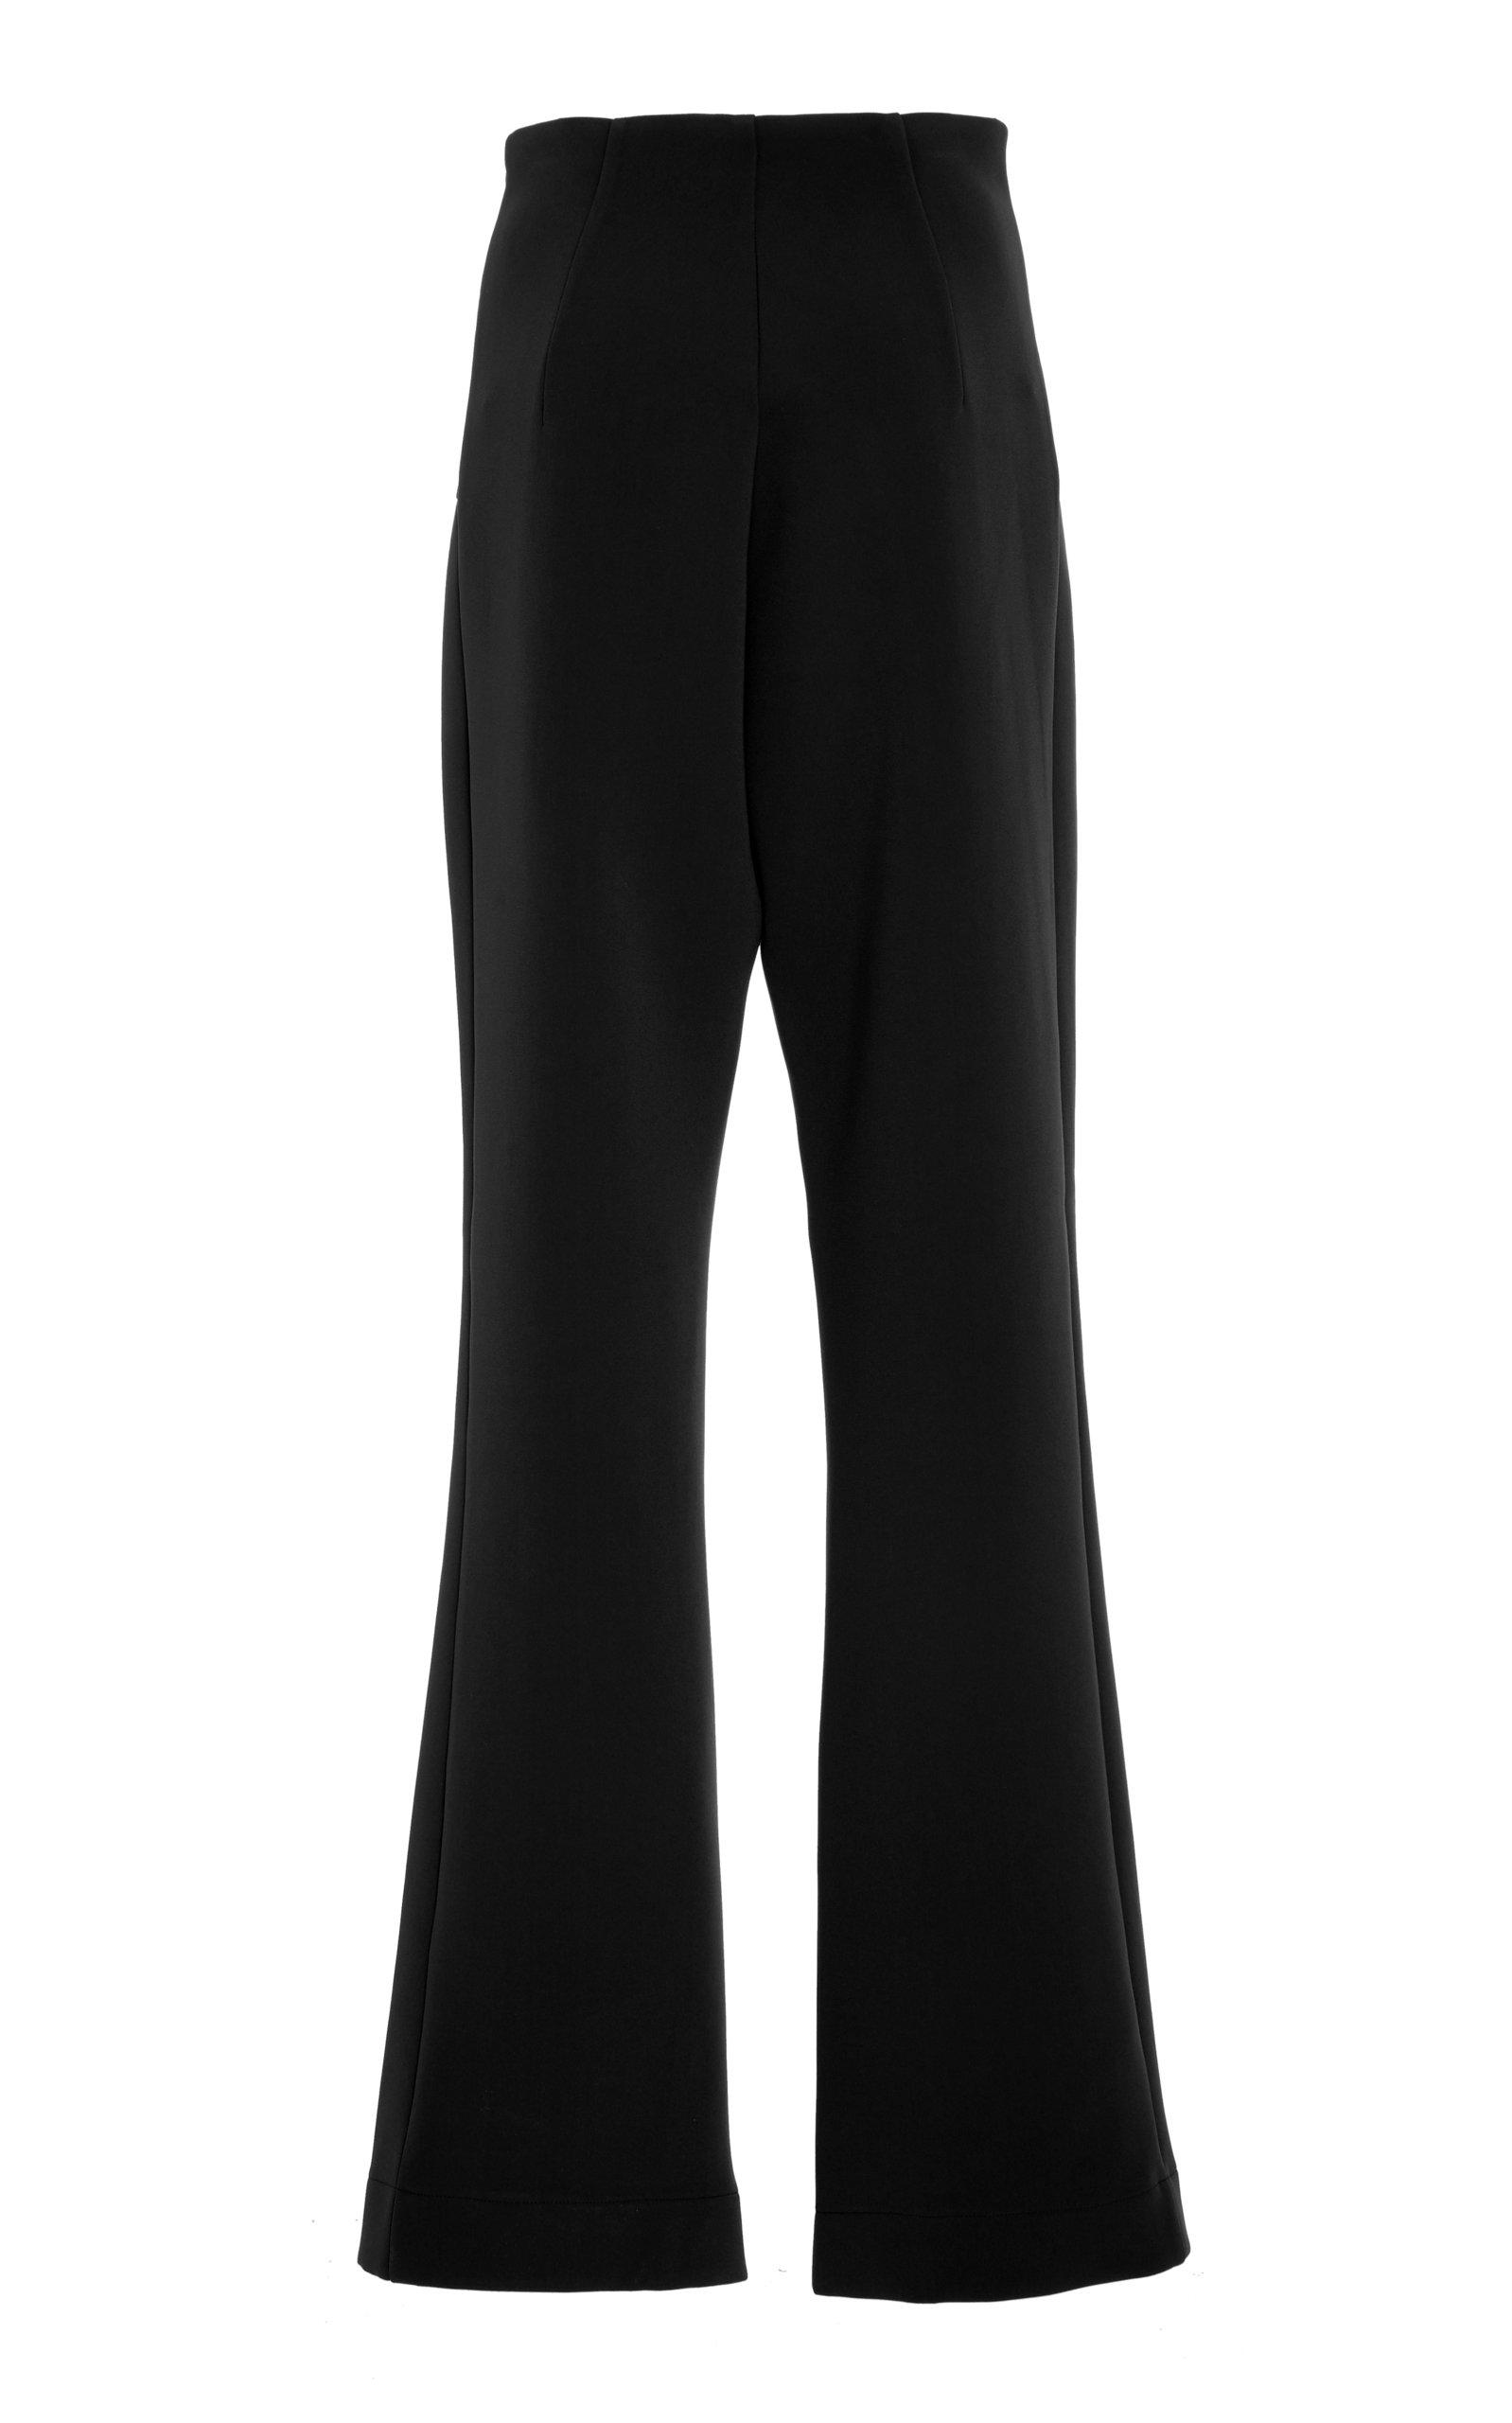 Paris Georgia Basics Synthetic High Waisted Bootleg Trousers in Black - Lyst